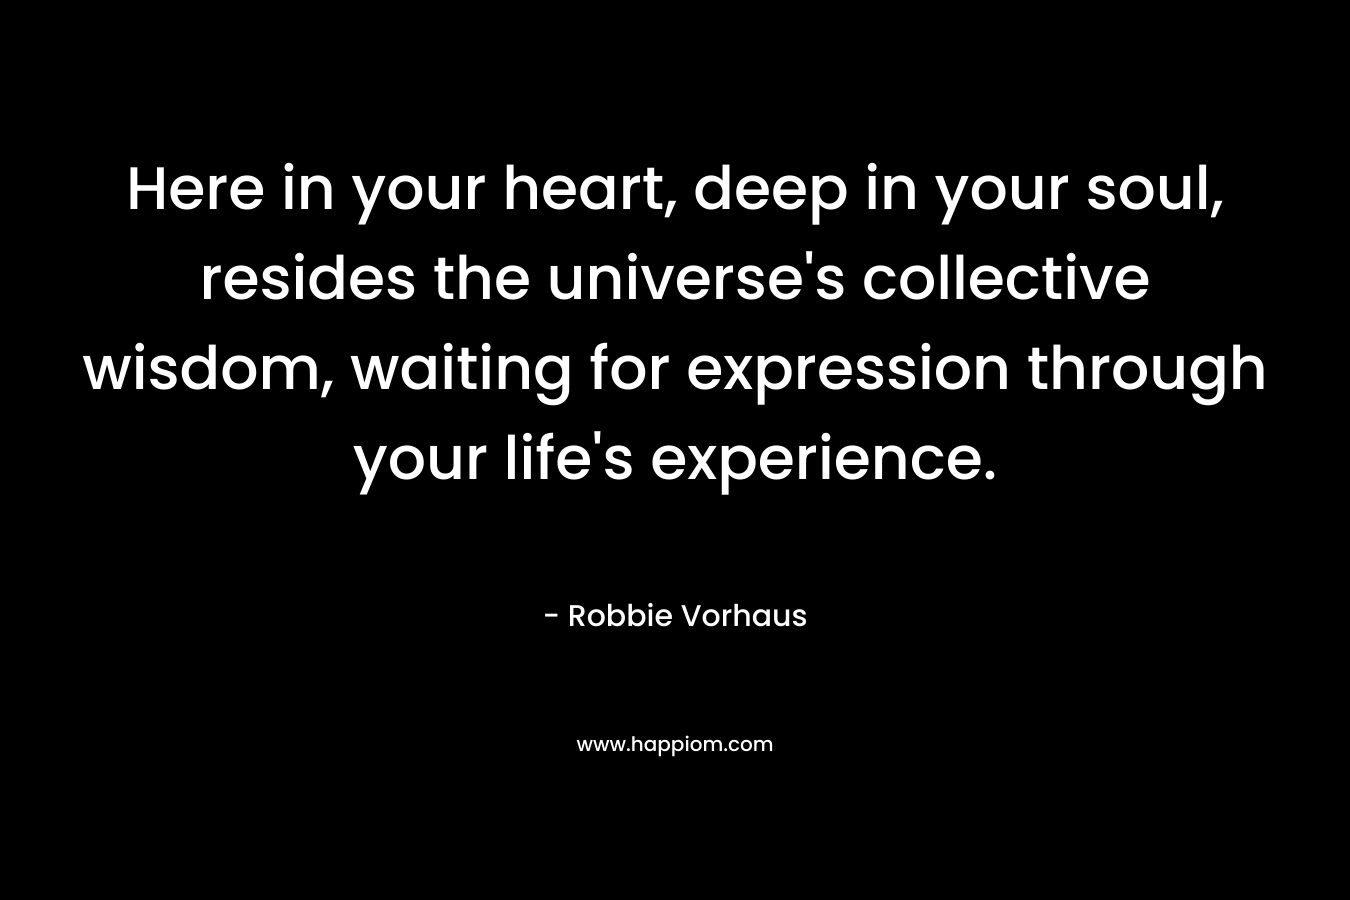 Here in your heart, deep in your soul, resides the universe’s collective wisdom, waiting for expression through your life’s experience. – Robbie Vorhaus